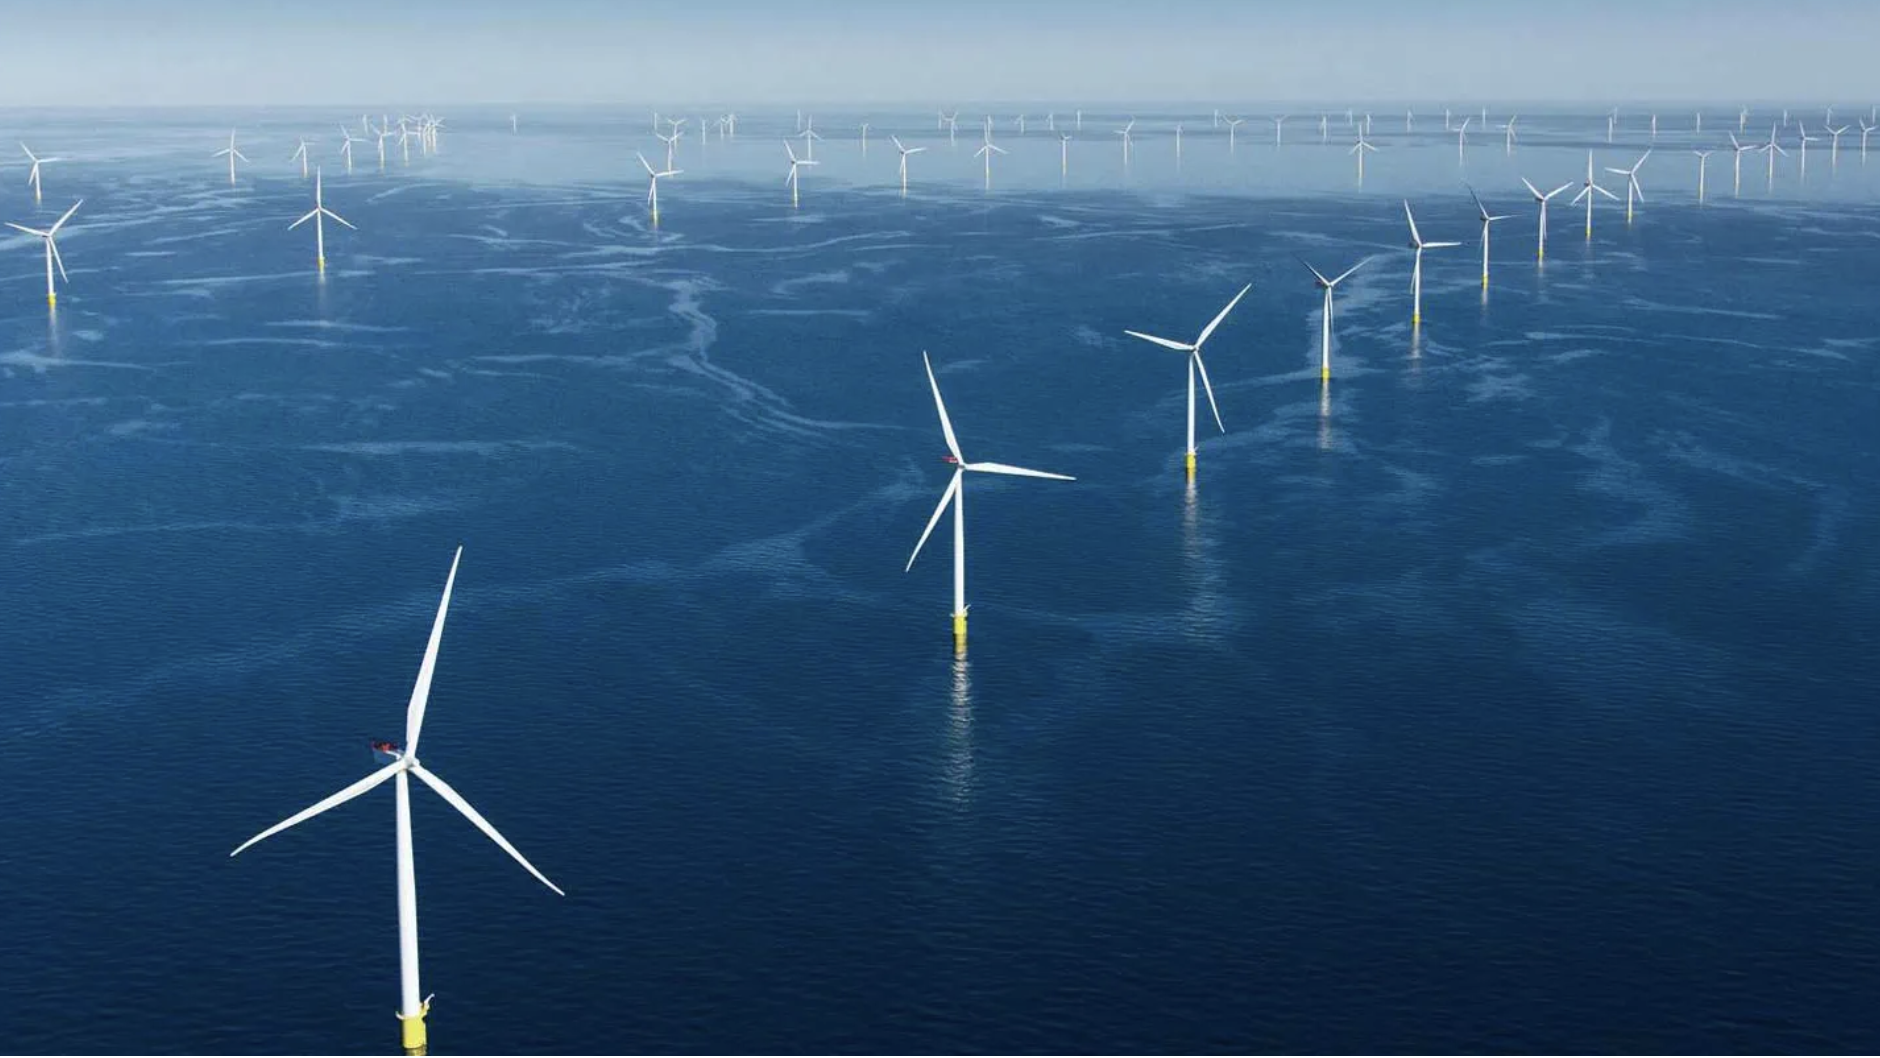 Hornsea 2 offshore wind farm now fully operational, making it the world’s largest